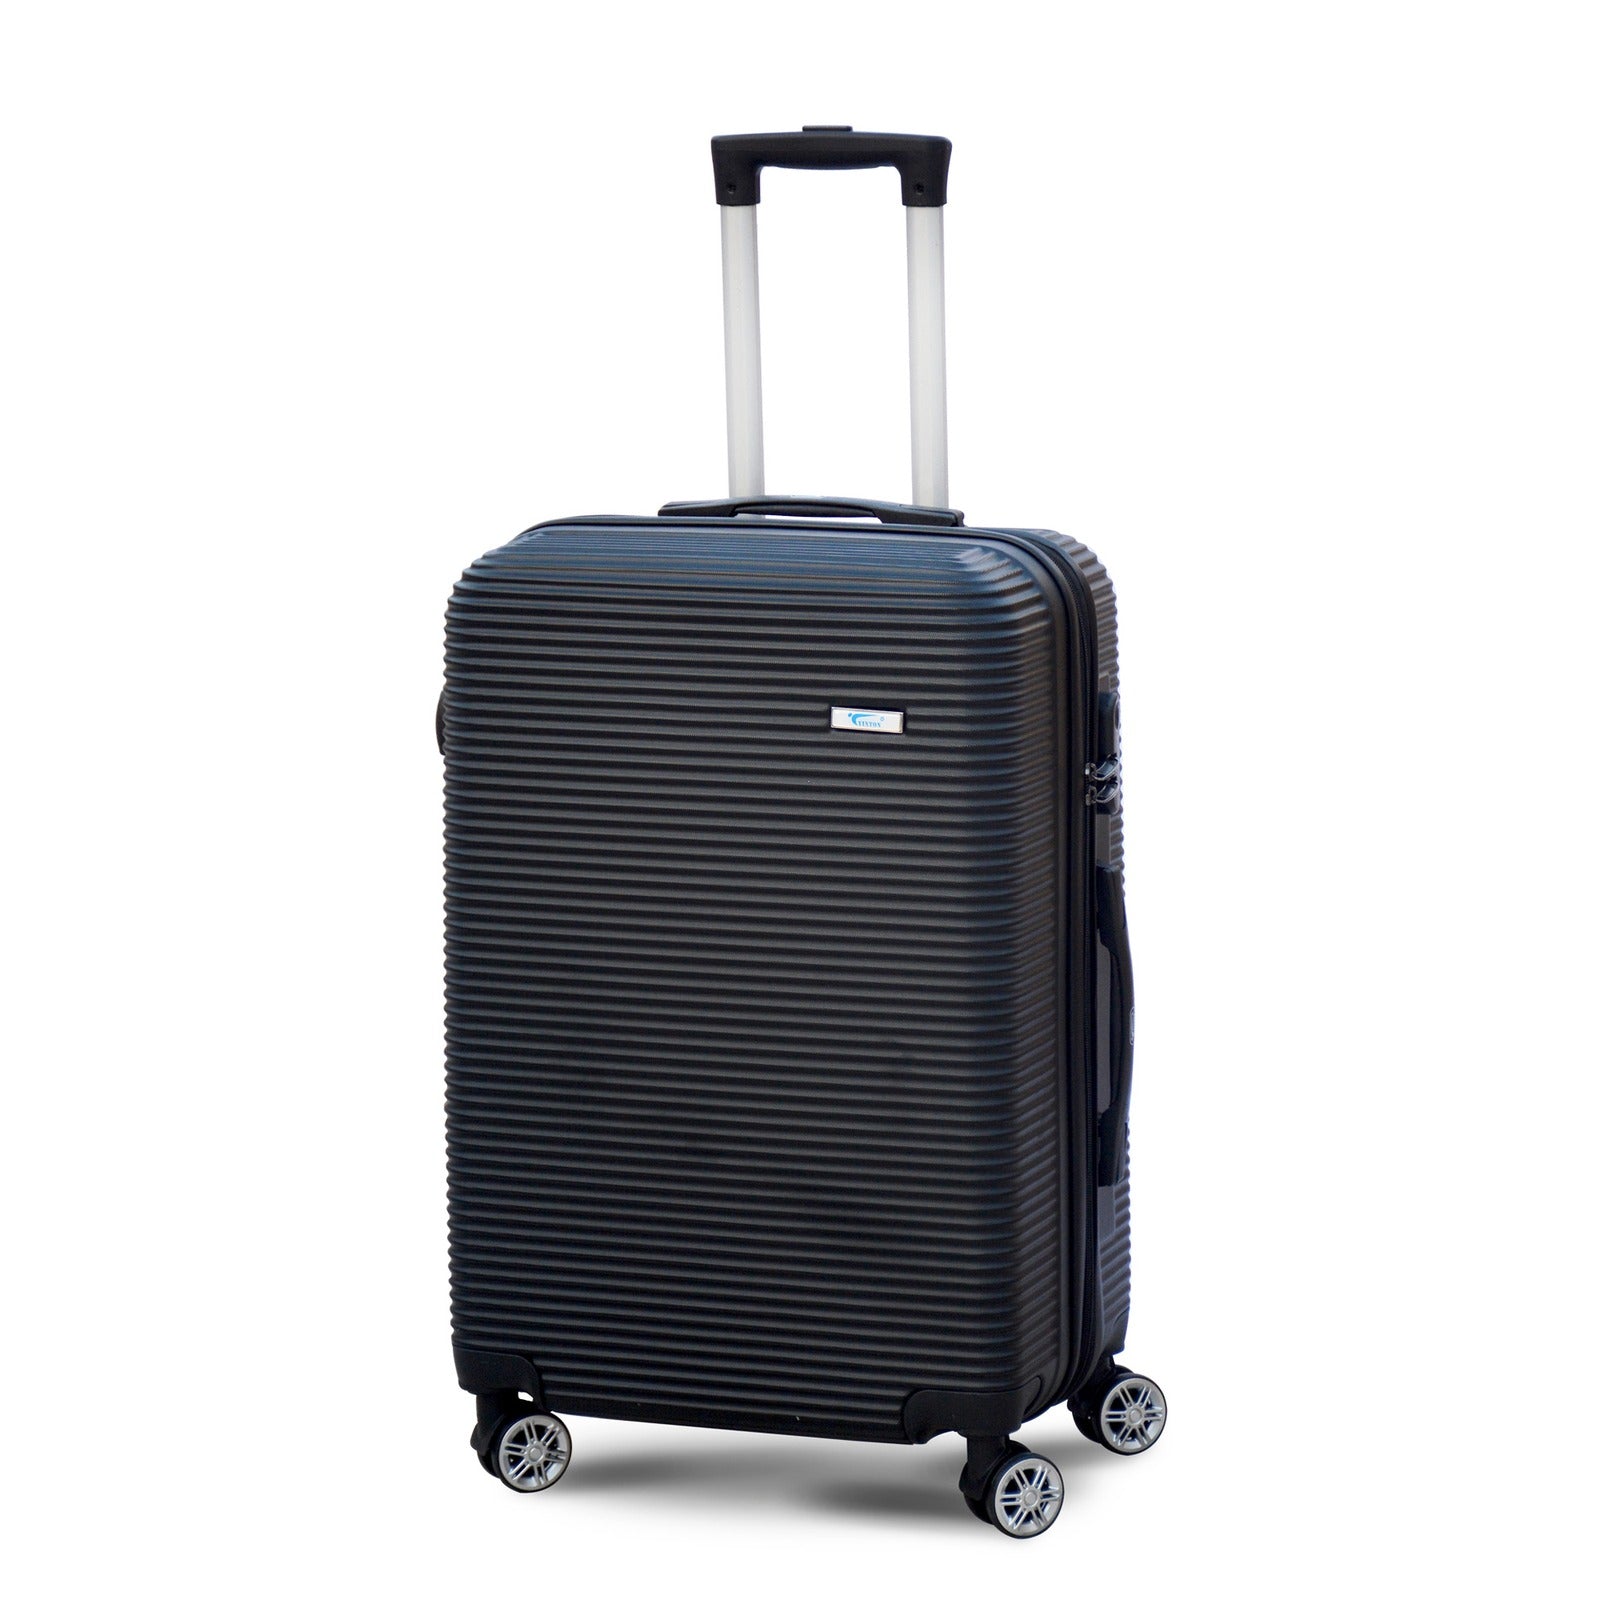 28" Black Colour JIAN ABS Line Luggage Lightweight Hard Case Trolley Bag With Spinner Wheel